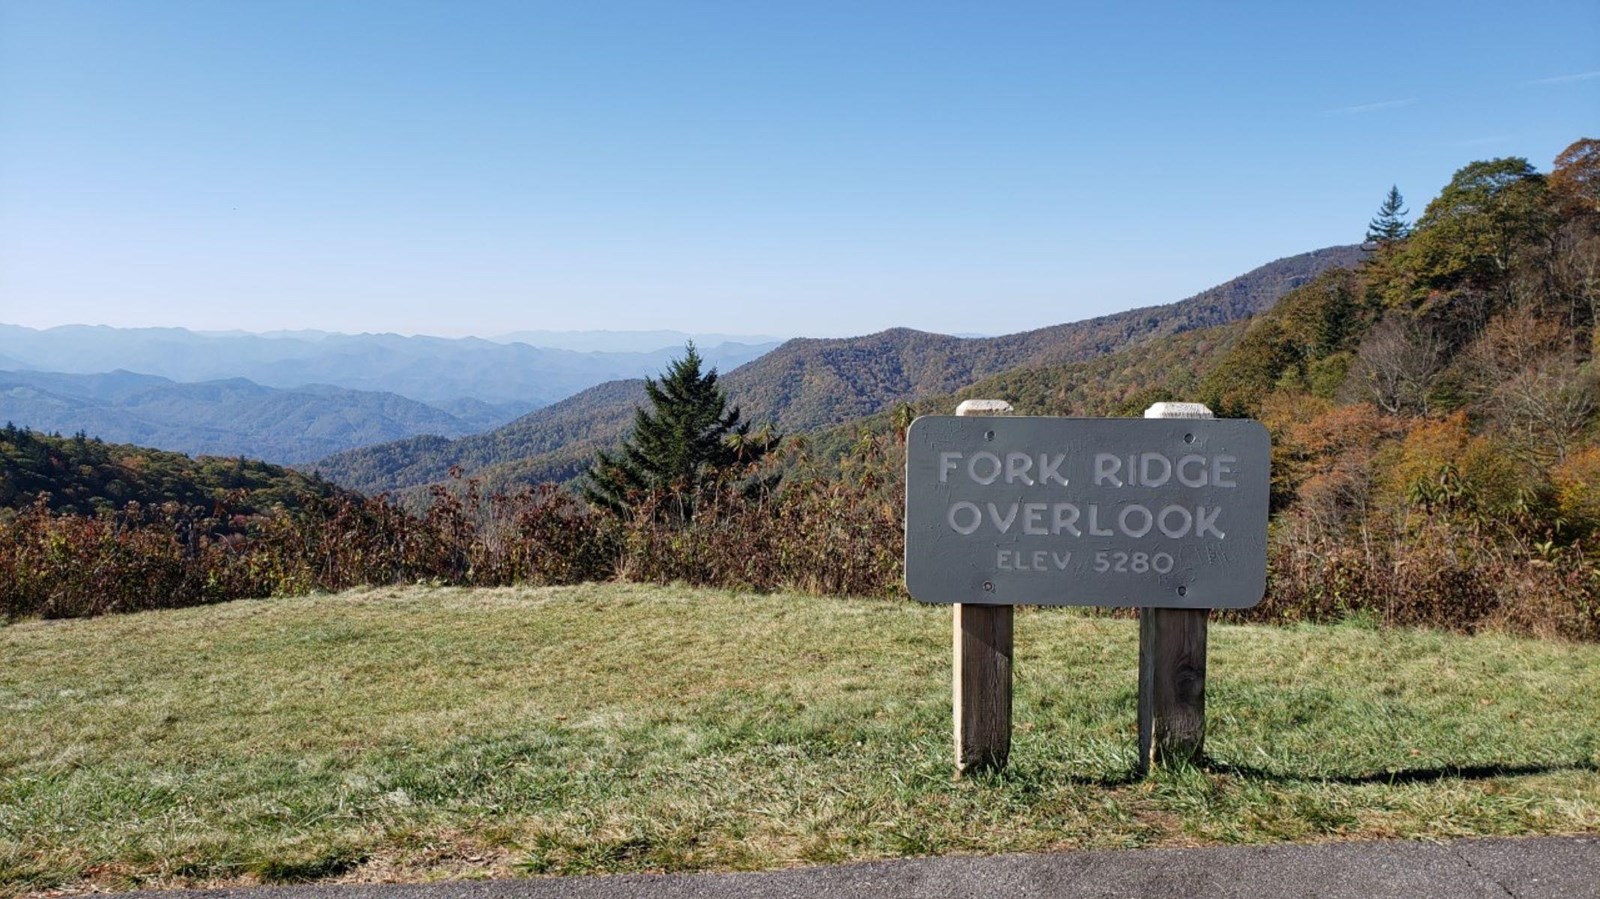 A Fork Ridge Overlook sign with miles of layered mountains in the background